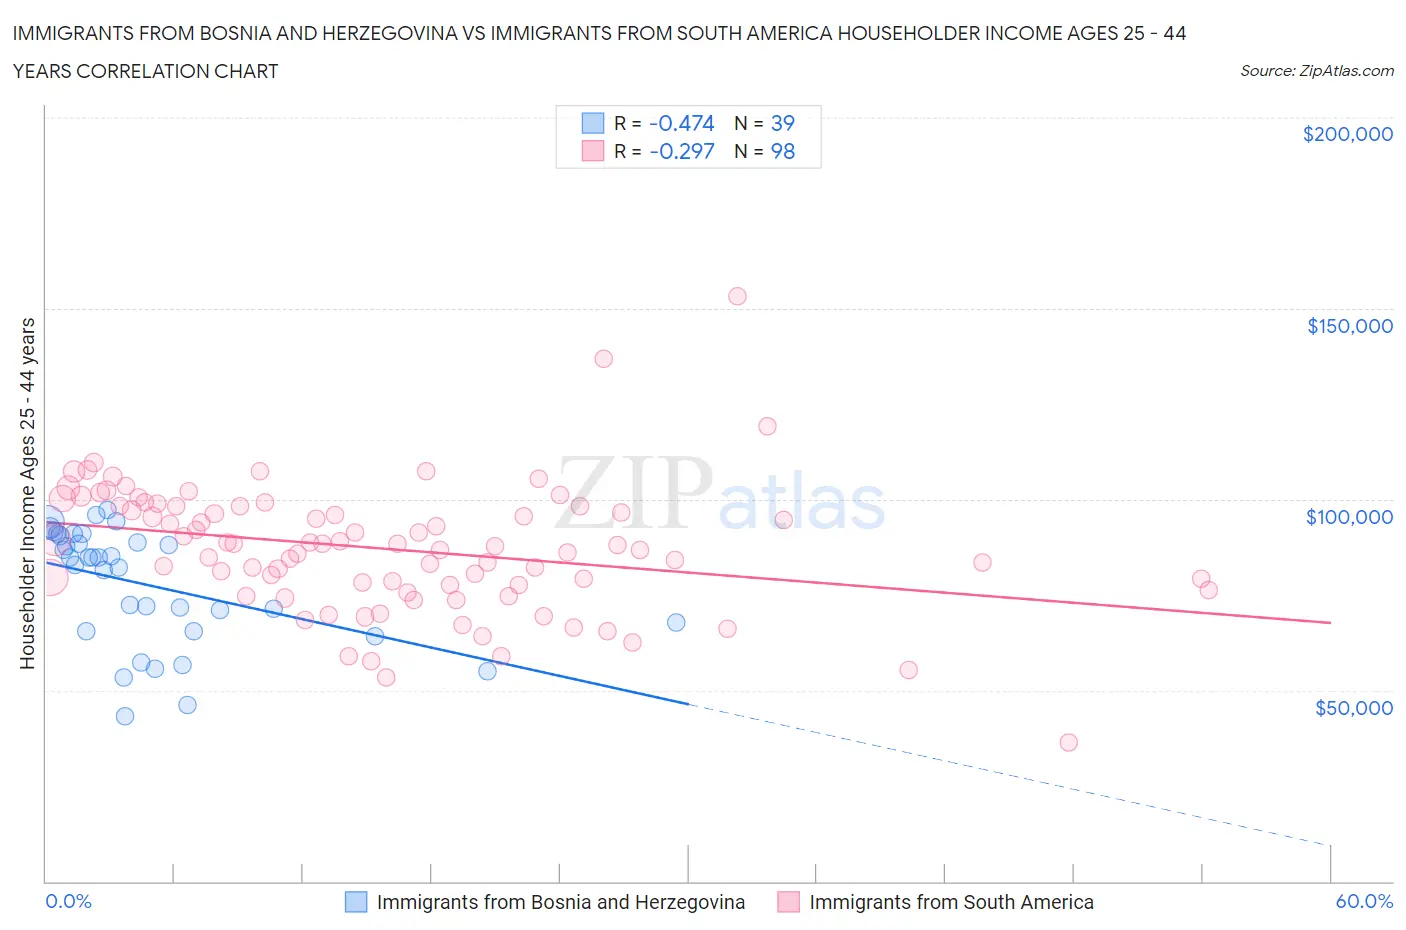 Immigrants from Bosnia and Herzegovina vs Immigrants from South America Householder Income Ages 25 - 44 years